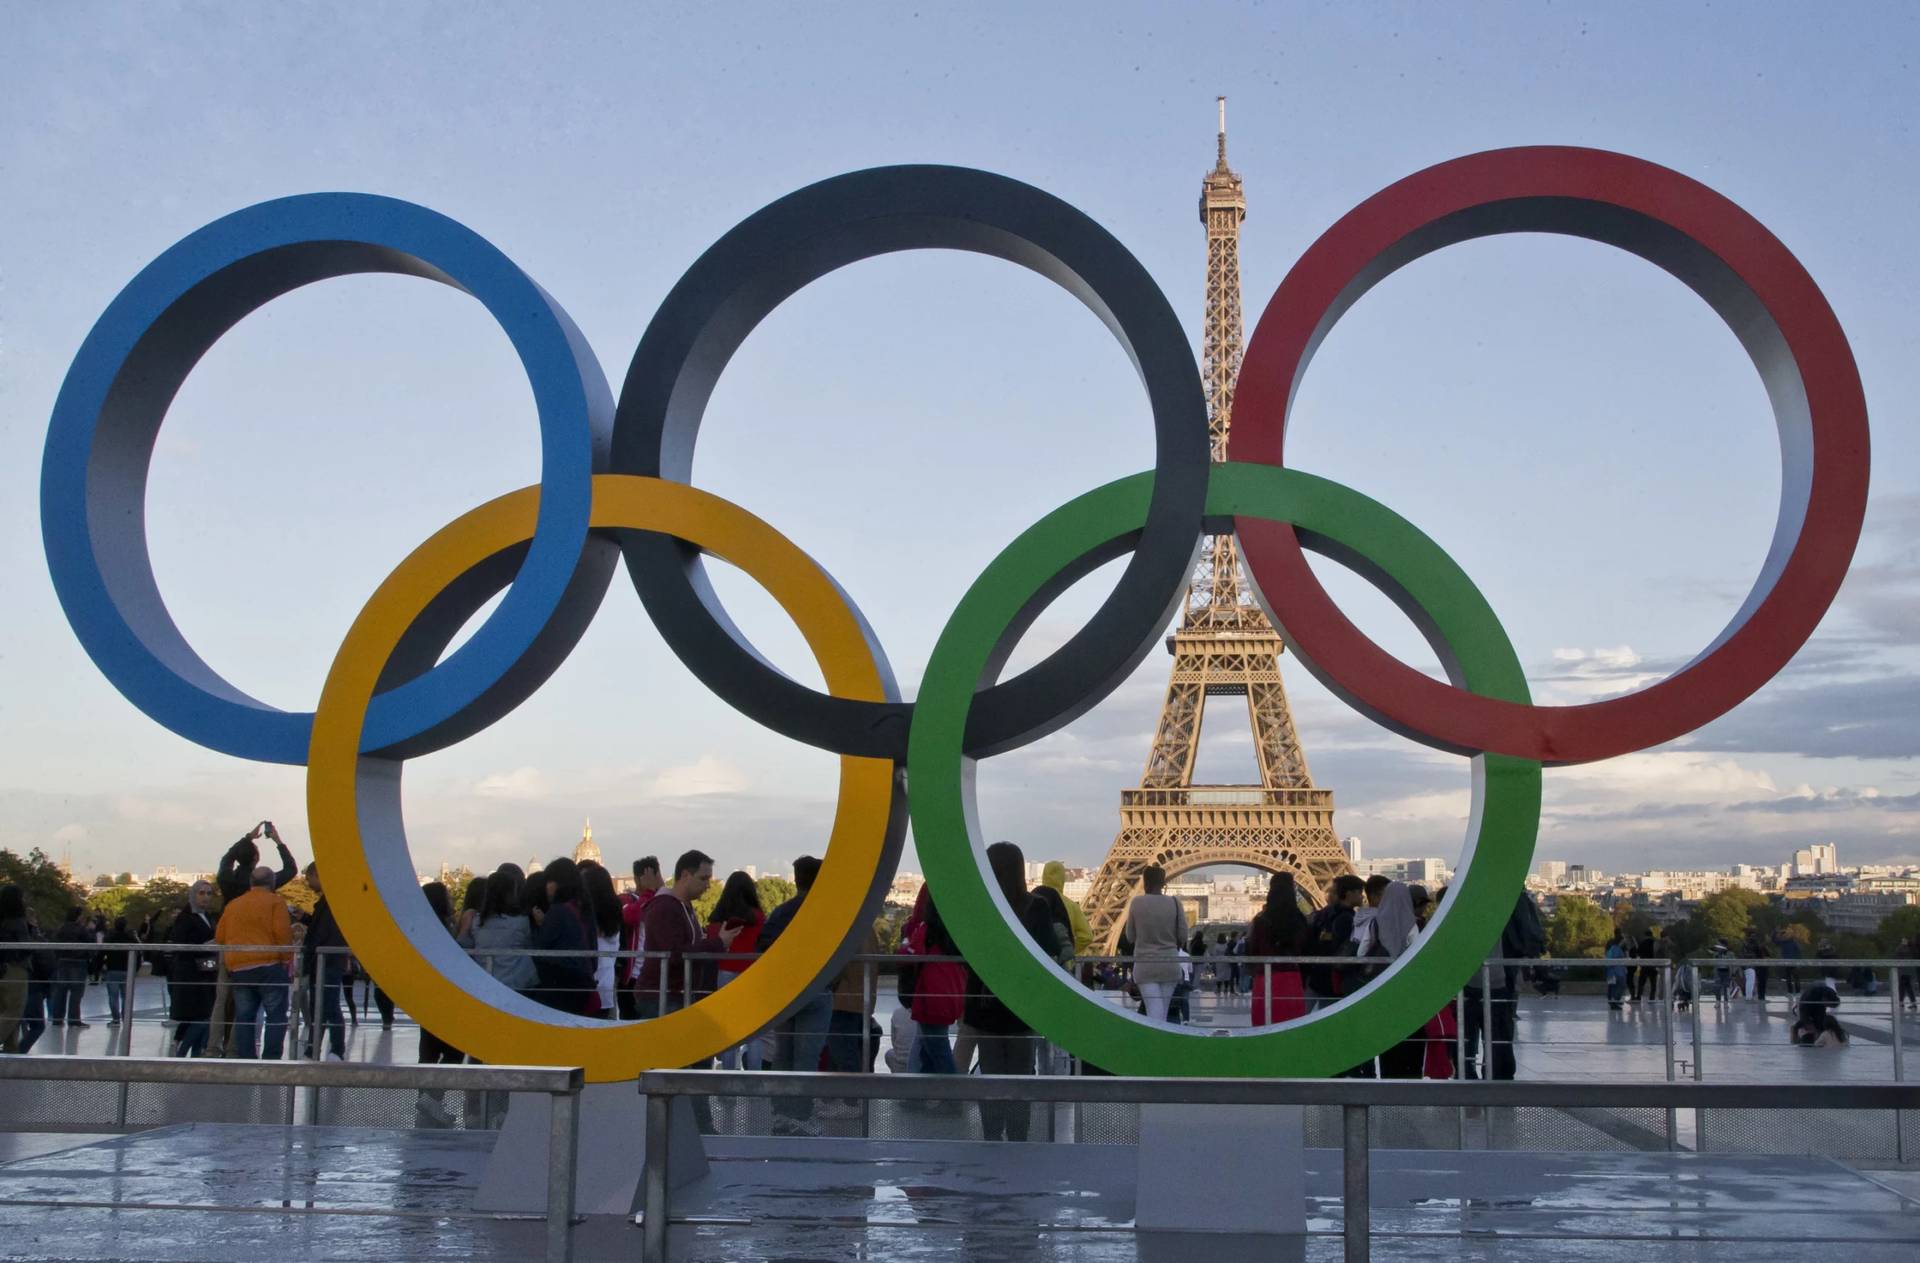 The Olympic rings are set up at the Trocadero plaza that overlooks the Eiffel Tower in Paris on Sept. 14, 2017. (Credit: Michel Euler/AP.)